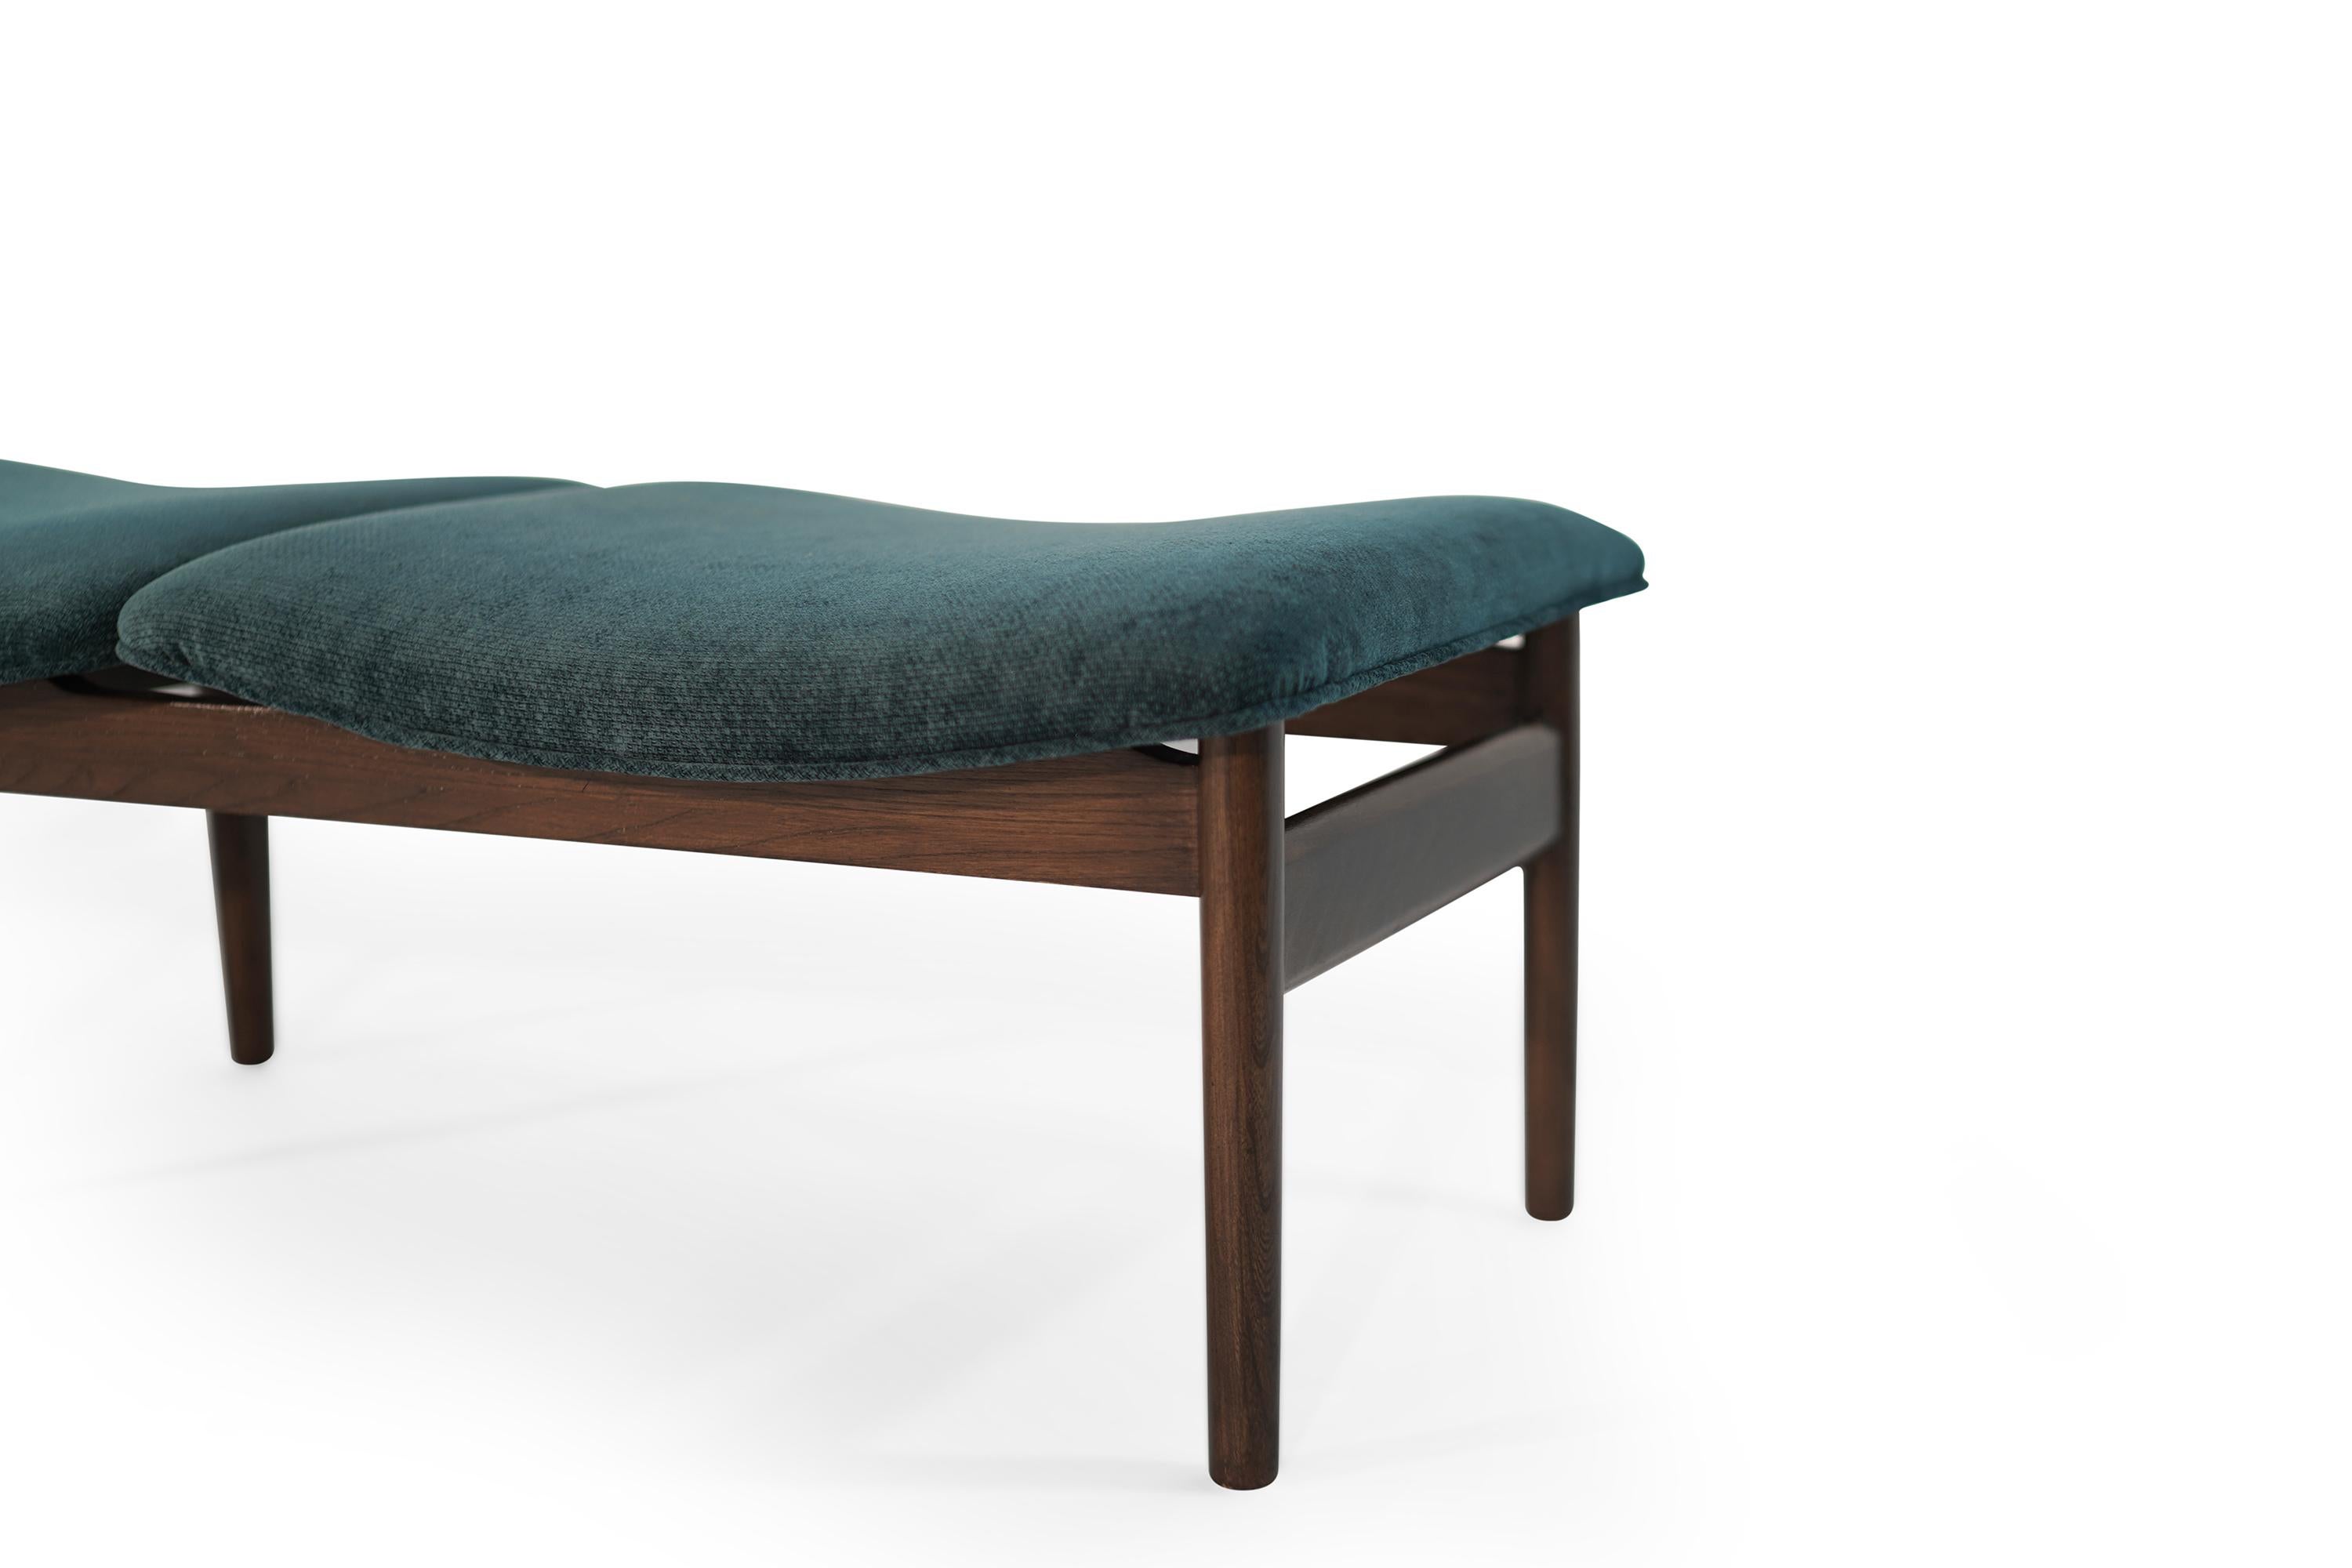 Lawrence Peabody Bench in Teal Twill, 1950s 2